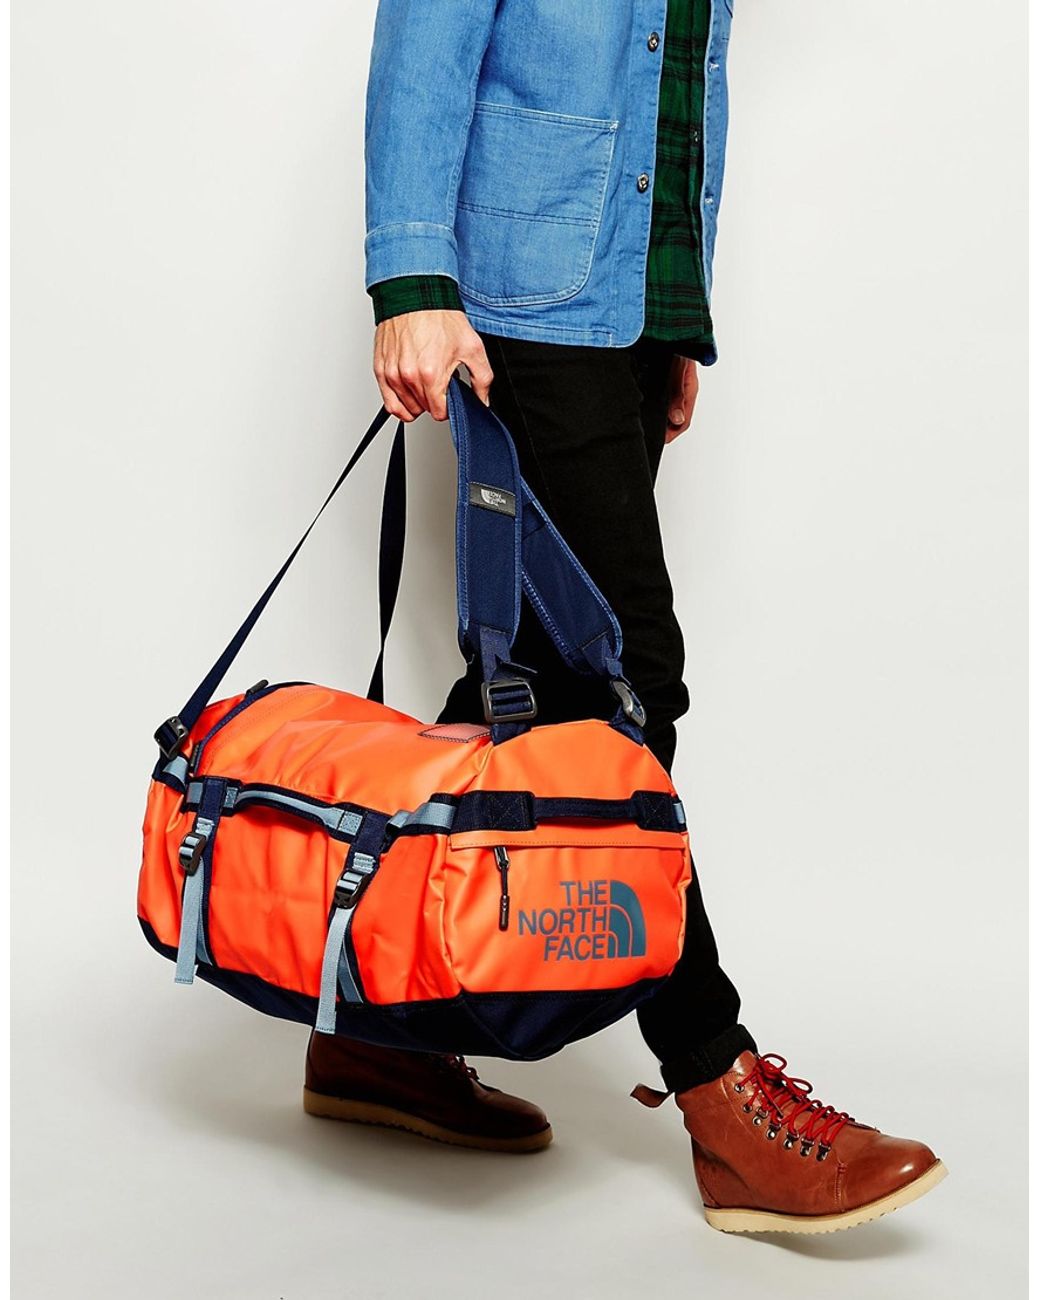 The North Face Base Camp Duffle Bag In Small in Orange for Men